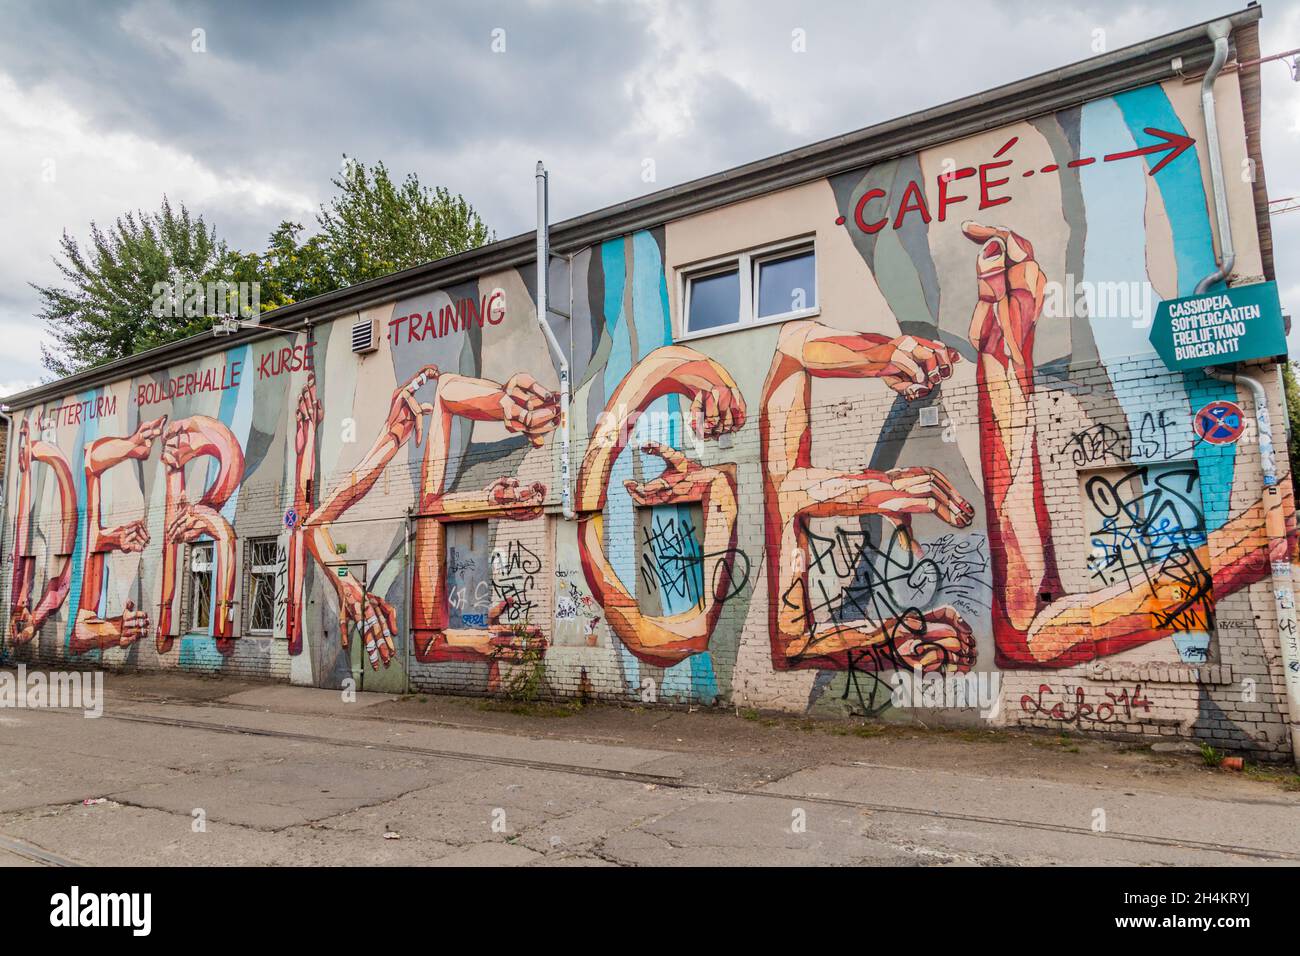 BERLIN, GERMANY - SEPTEMBER 1, 2017: Street art in RAW Gelande subcultural compound in Berlin. Stock Photo